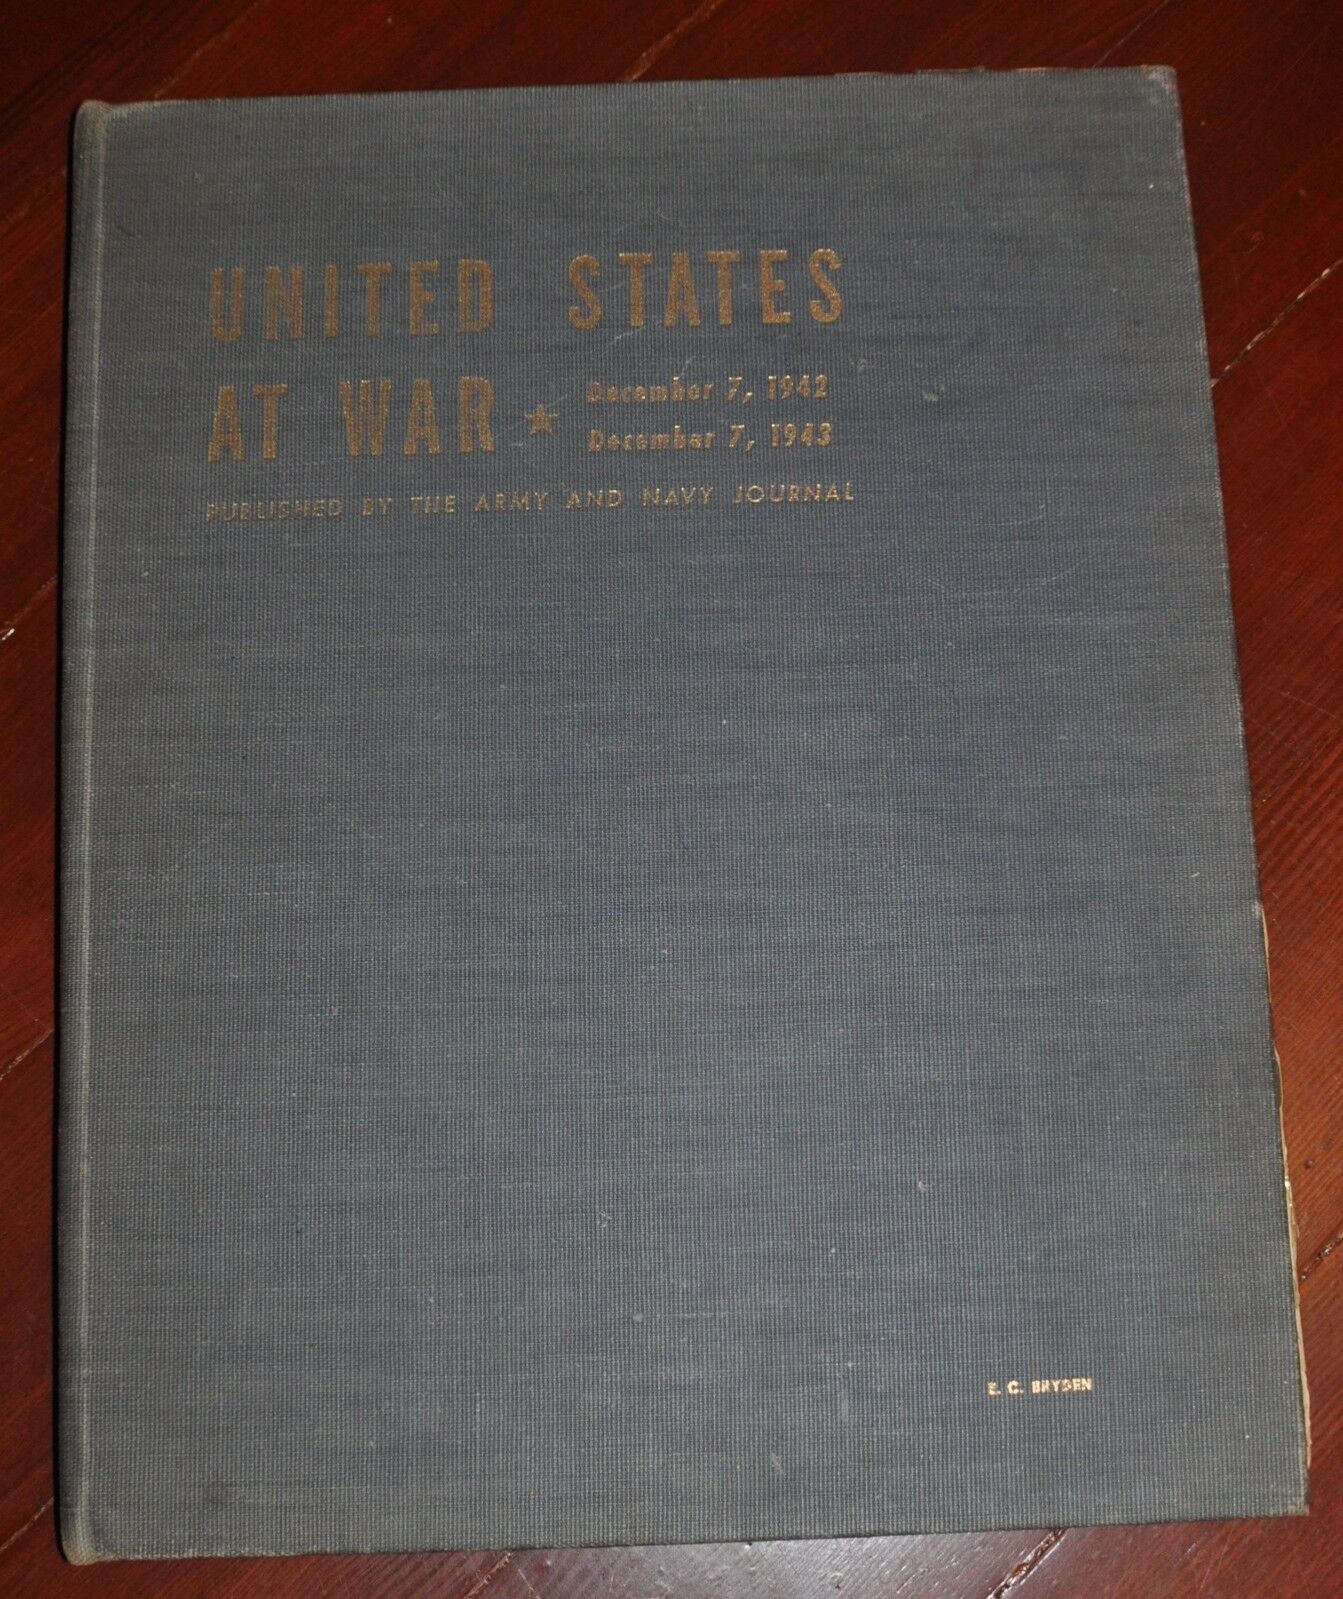 United States AT WAR Published by Arny and Navy Publuishing Dec. 7th 42 to 43